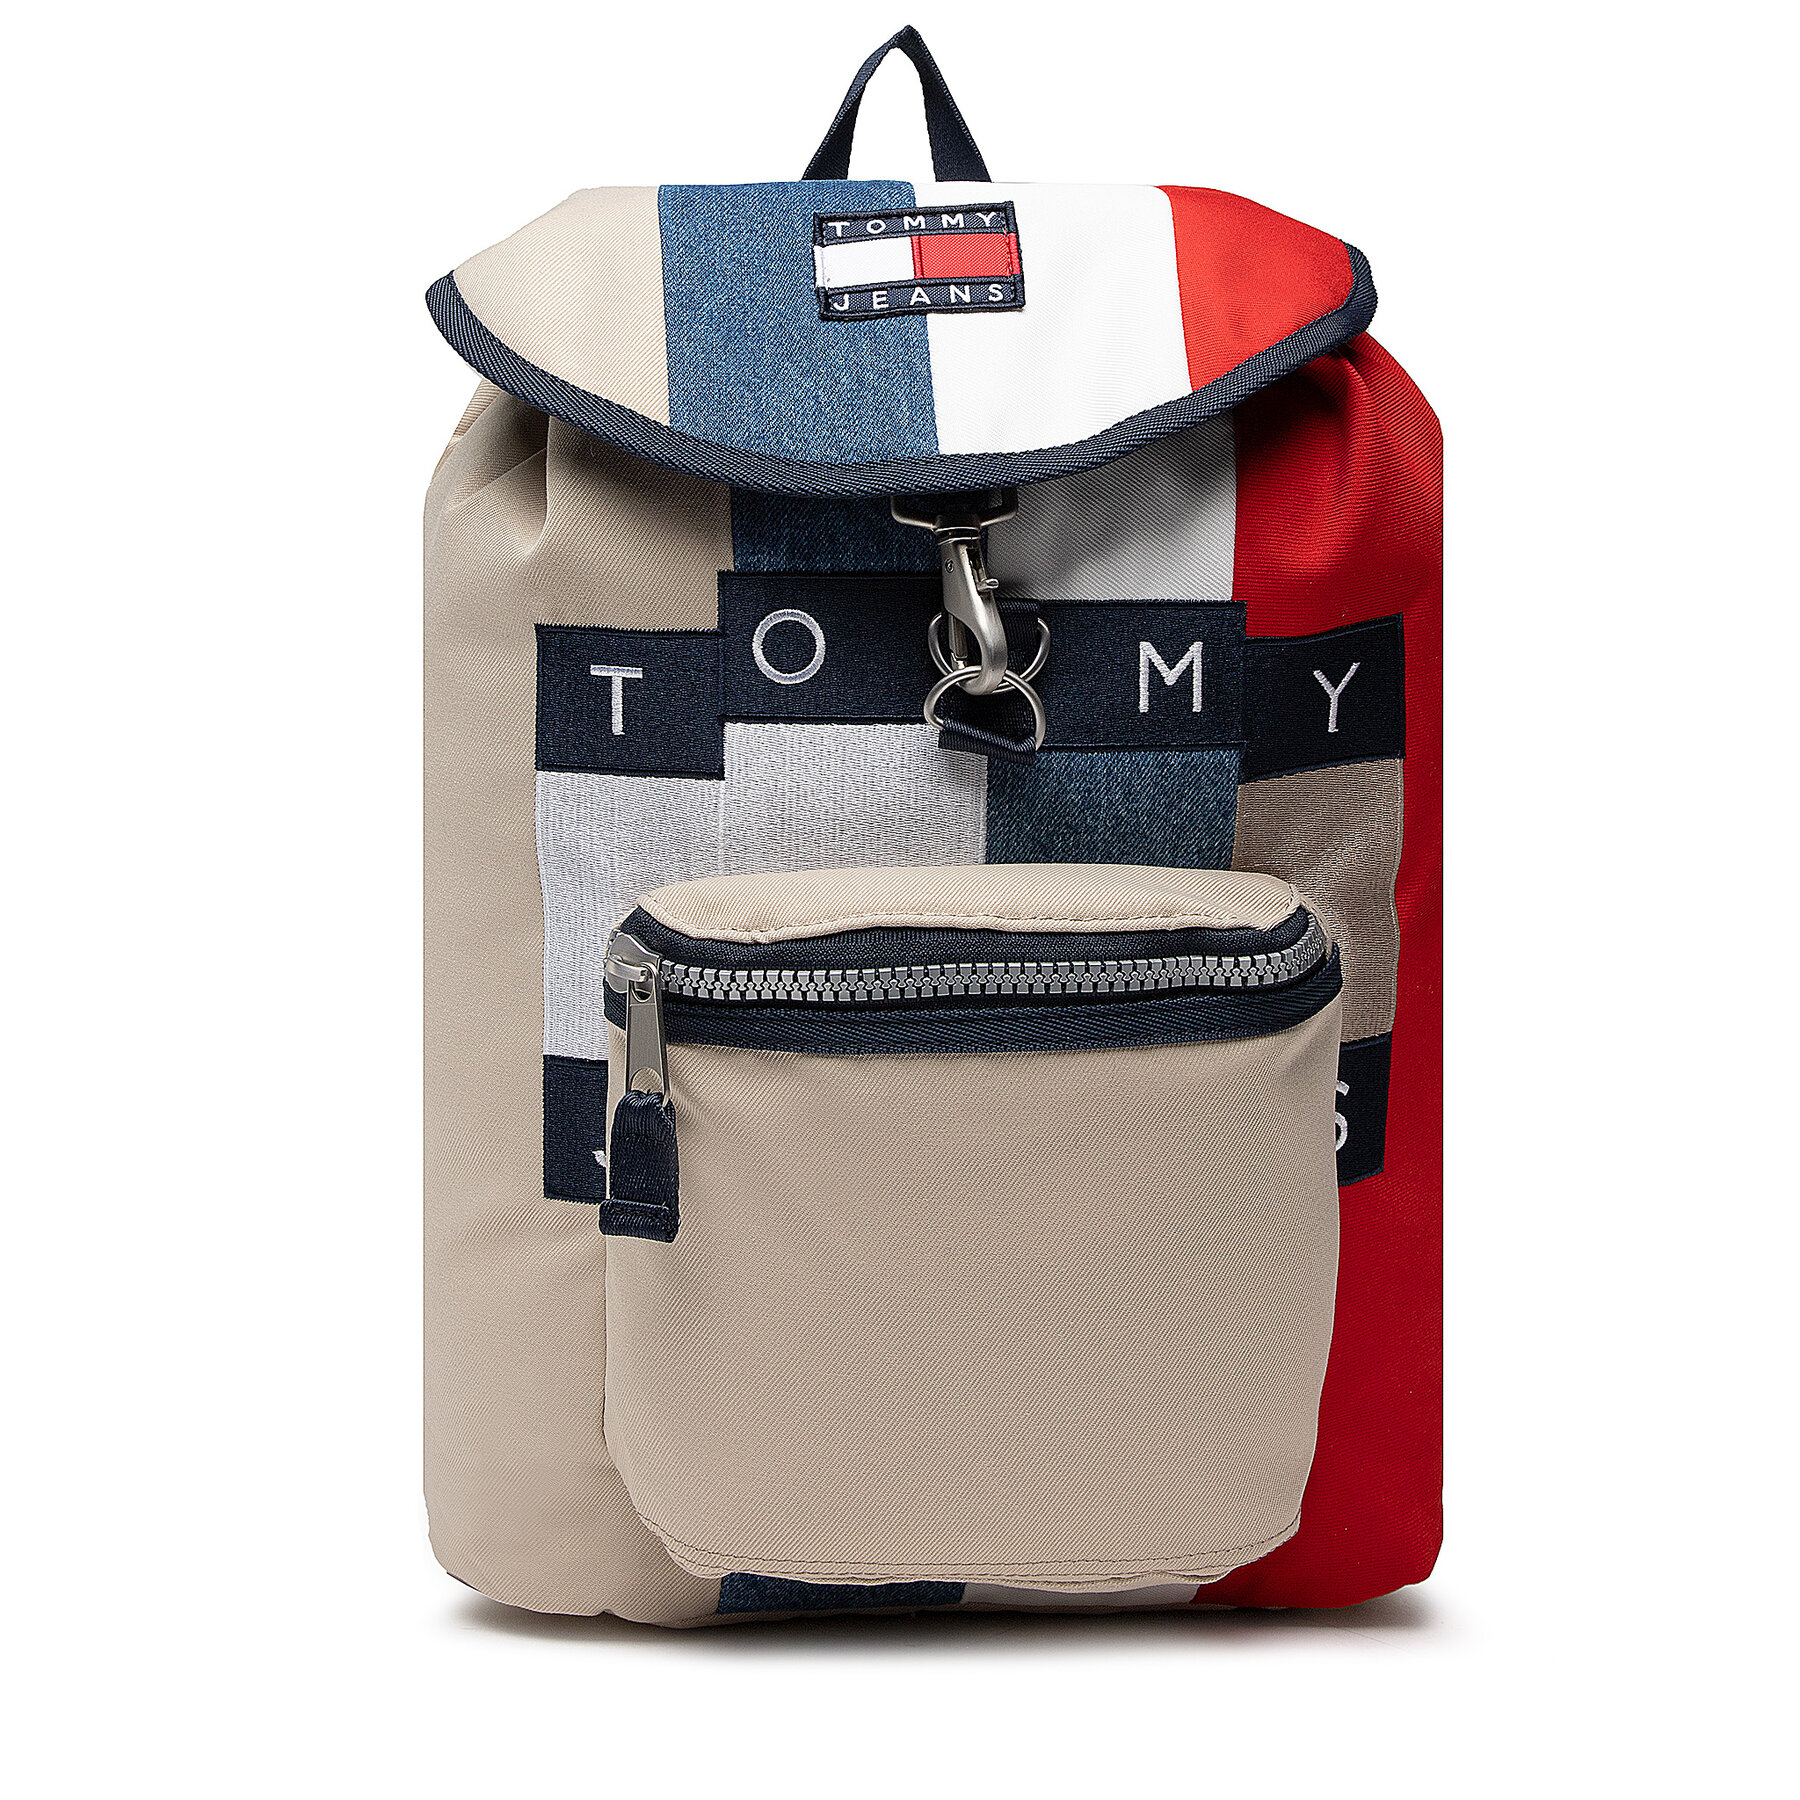 Rucsac Tommy Jeans Tjm Heritage Flap Backpack Vars. AM0AM08861 0GY 0GY imagine super redus 2022